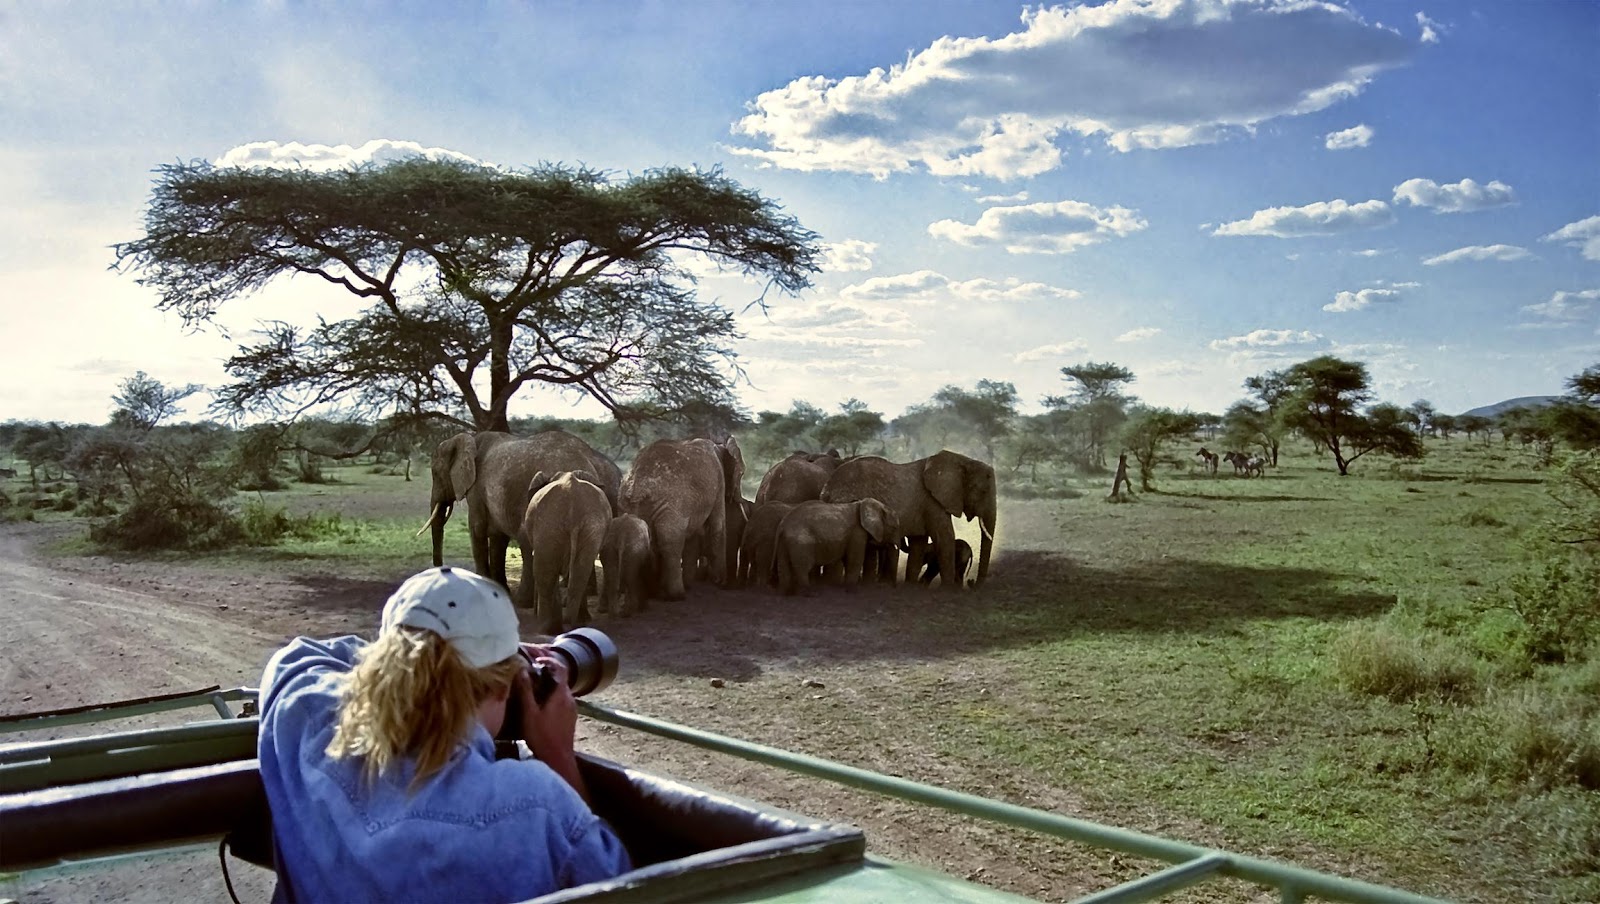 People on a boat looking at elephants

Description automatically generated with low confidence